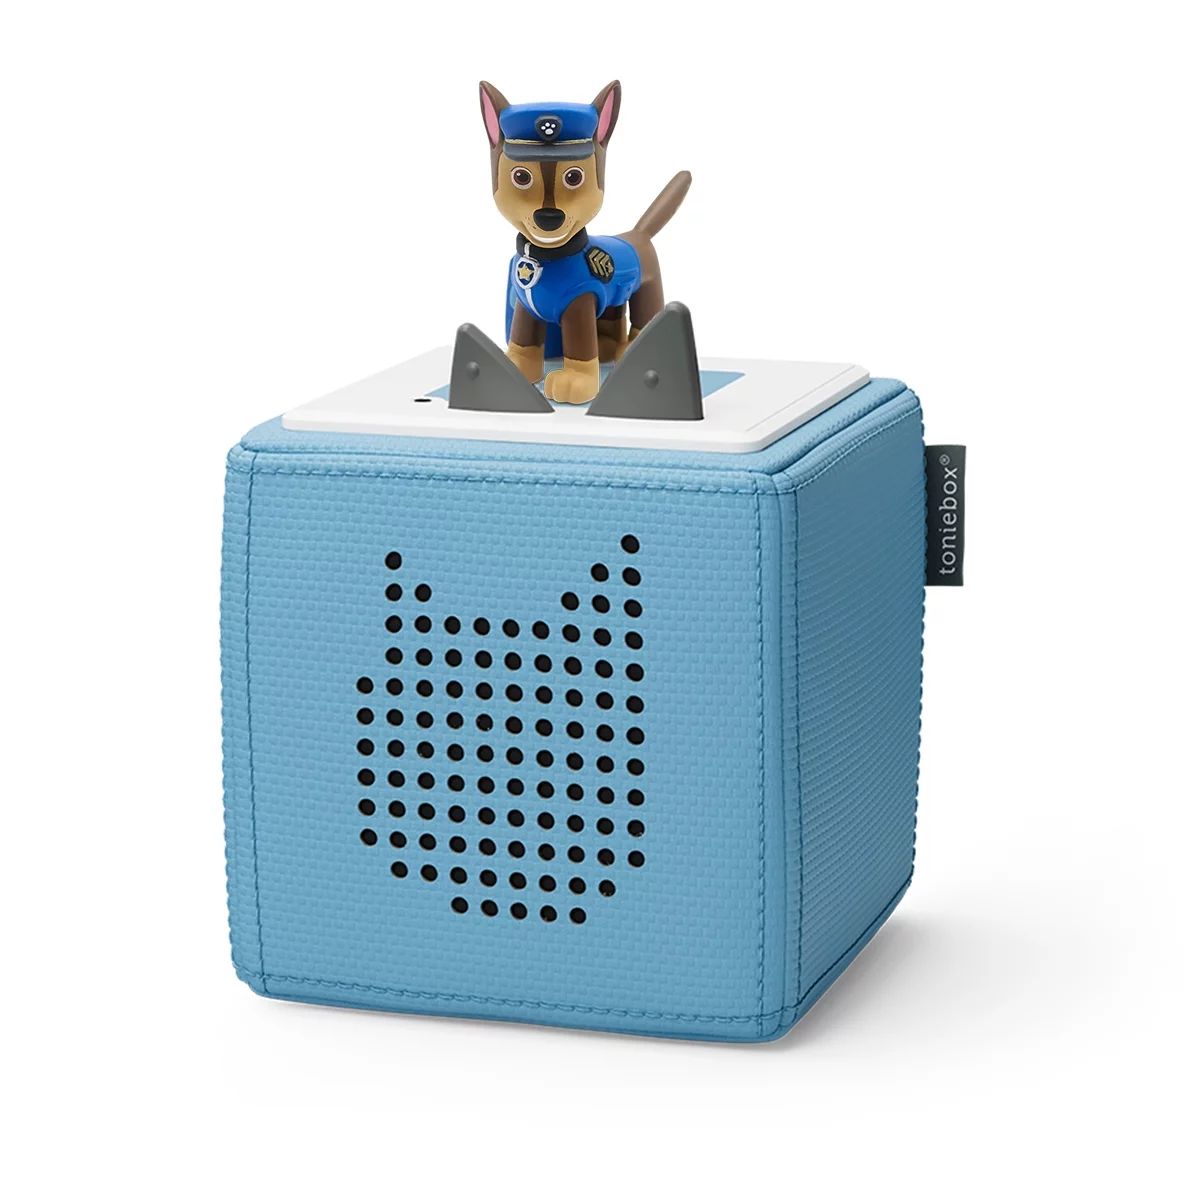 Tonies Paw Patrol Toniebox Audio Player Starter Set with Chase, for Kids 3+, Light Blue | Walmart (US)